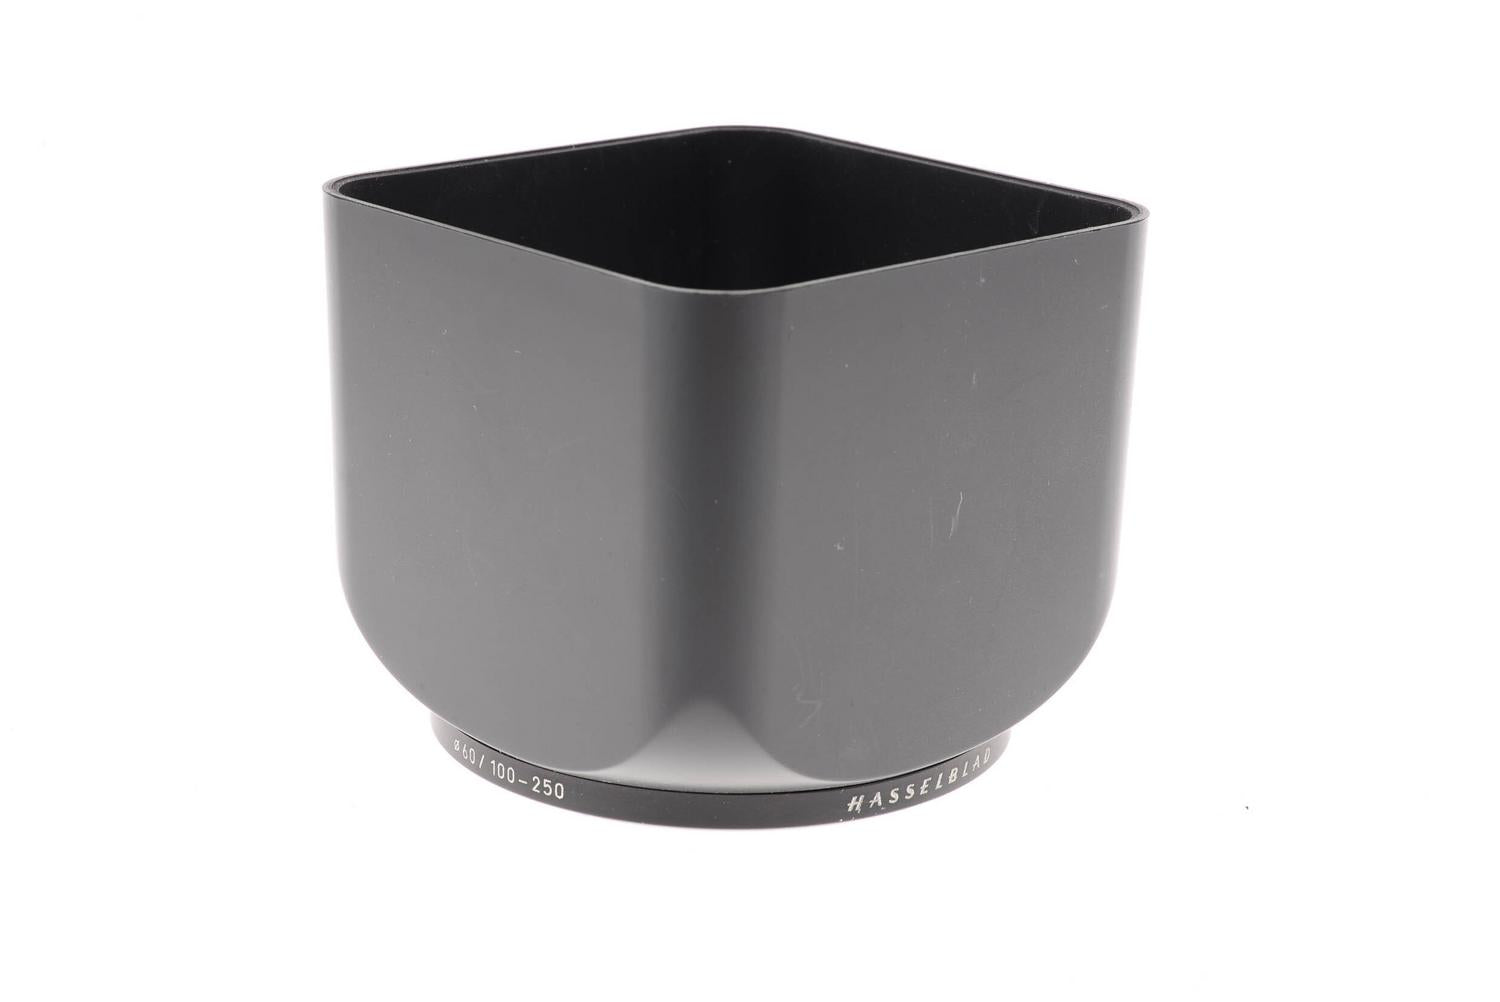 Hasselblad Lens Shade 60 / 100-250 (40673) - Accessory